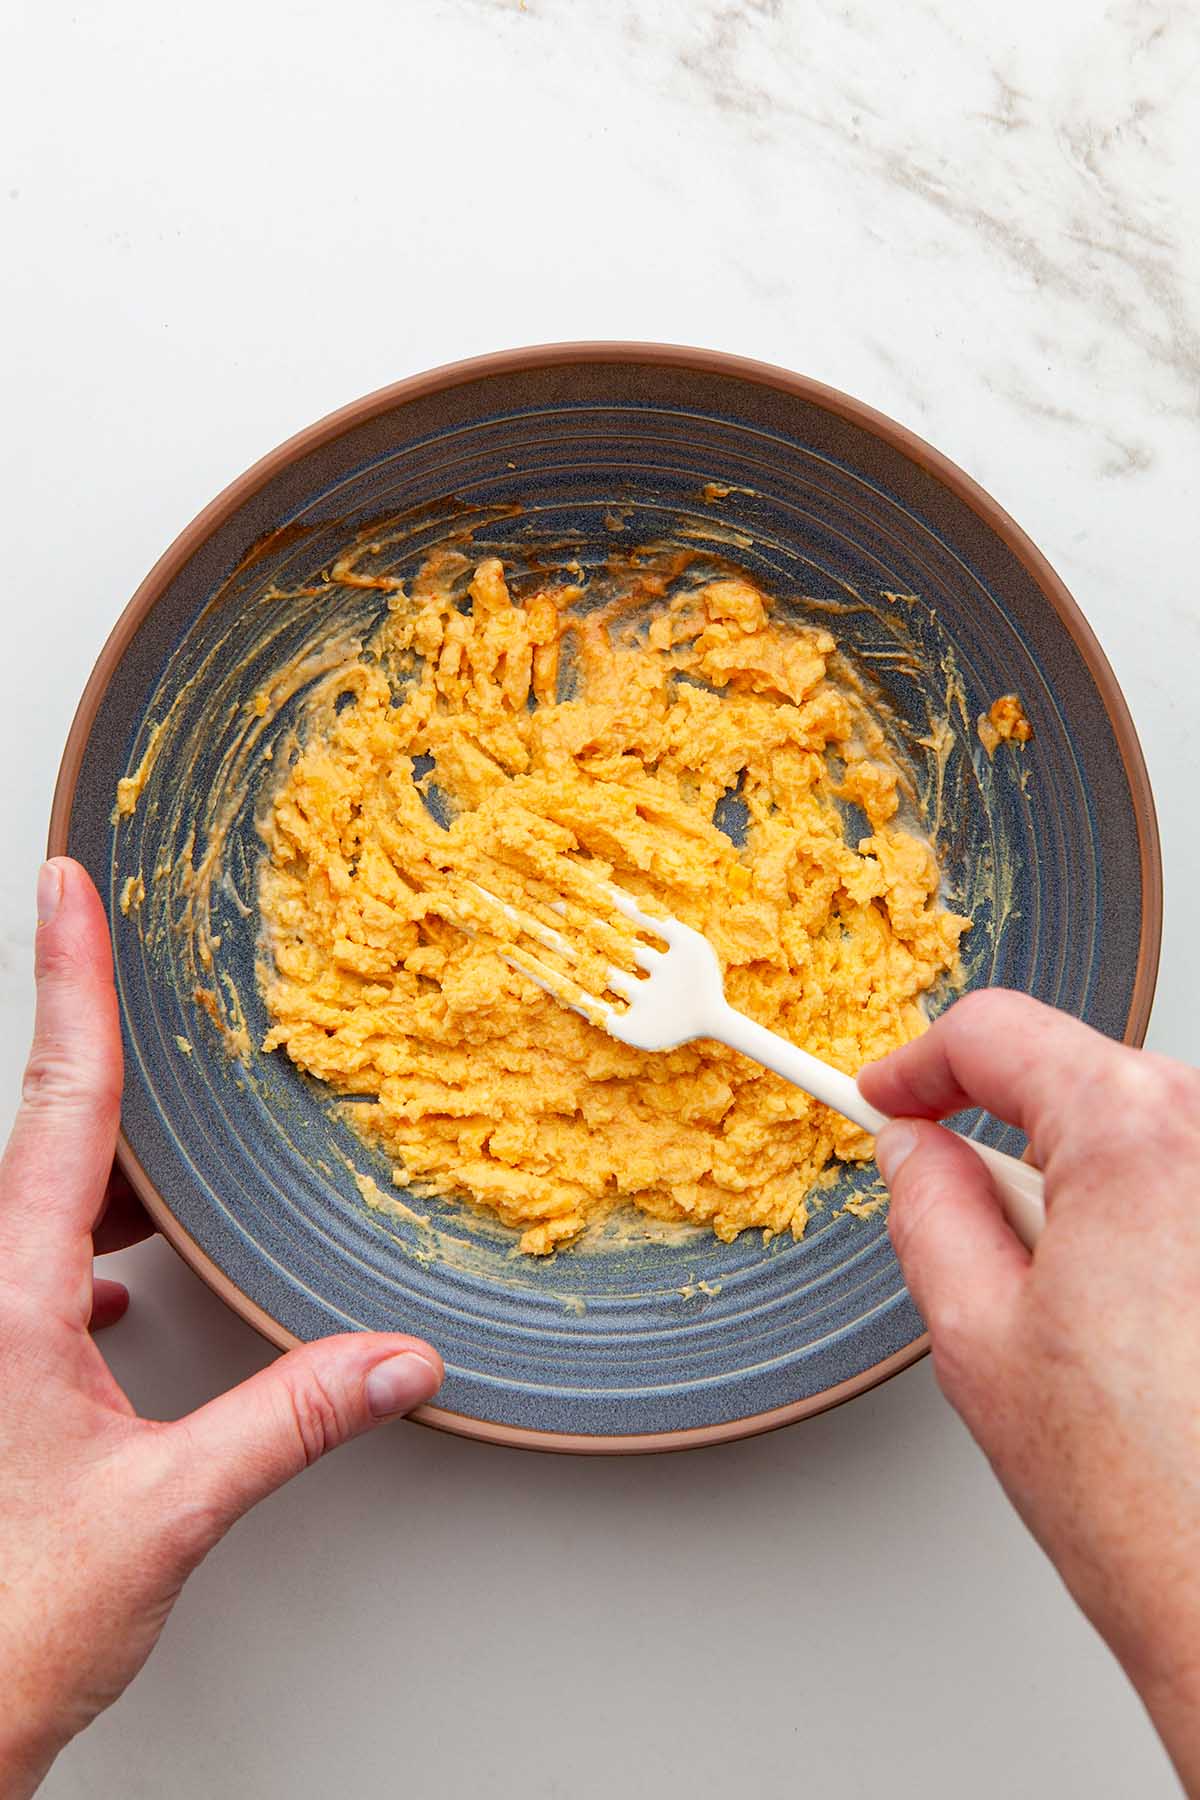 Hands mashing hard boiled egg yolks with sriracha and mayonnaise in a blue bowl using a white fork.